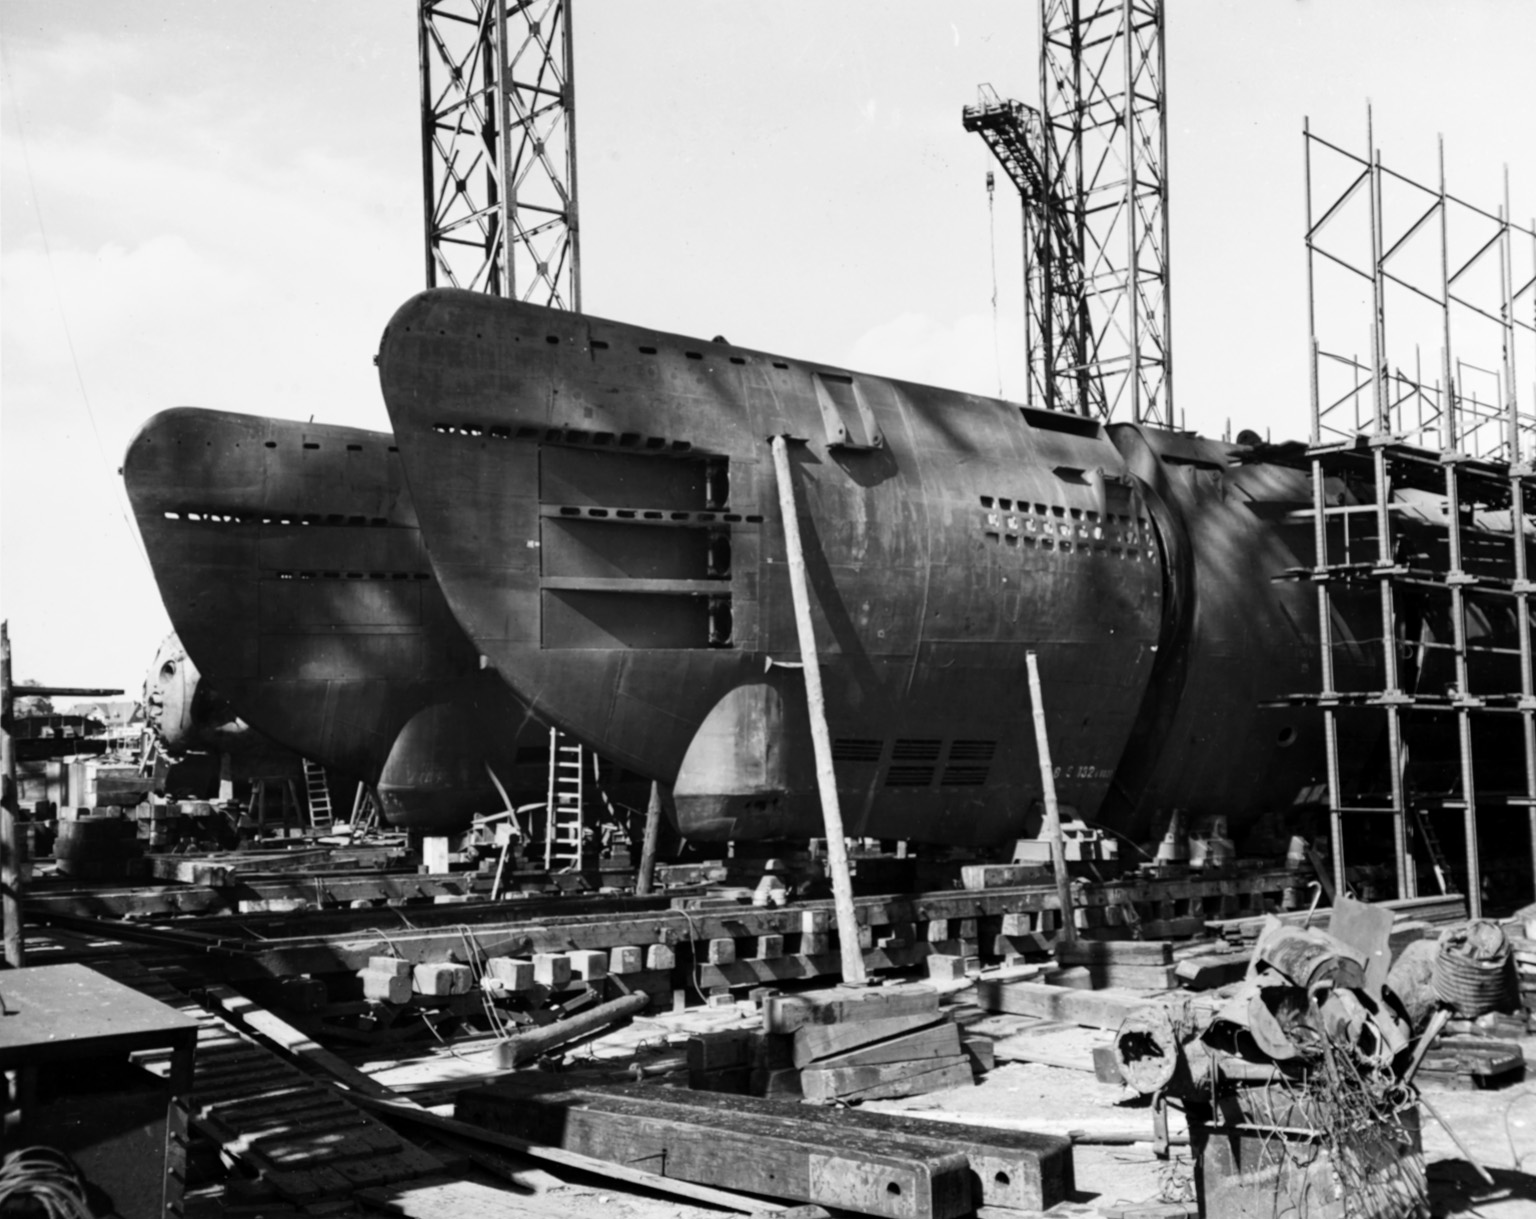 Two Type XXI U-boats lie under construction at the shipyards in Bremen, Germany in this photo taken after the submarines were captured by Allied troops in 1945.